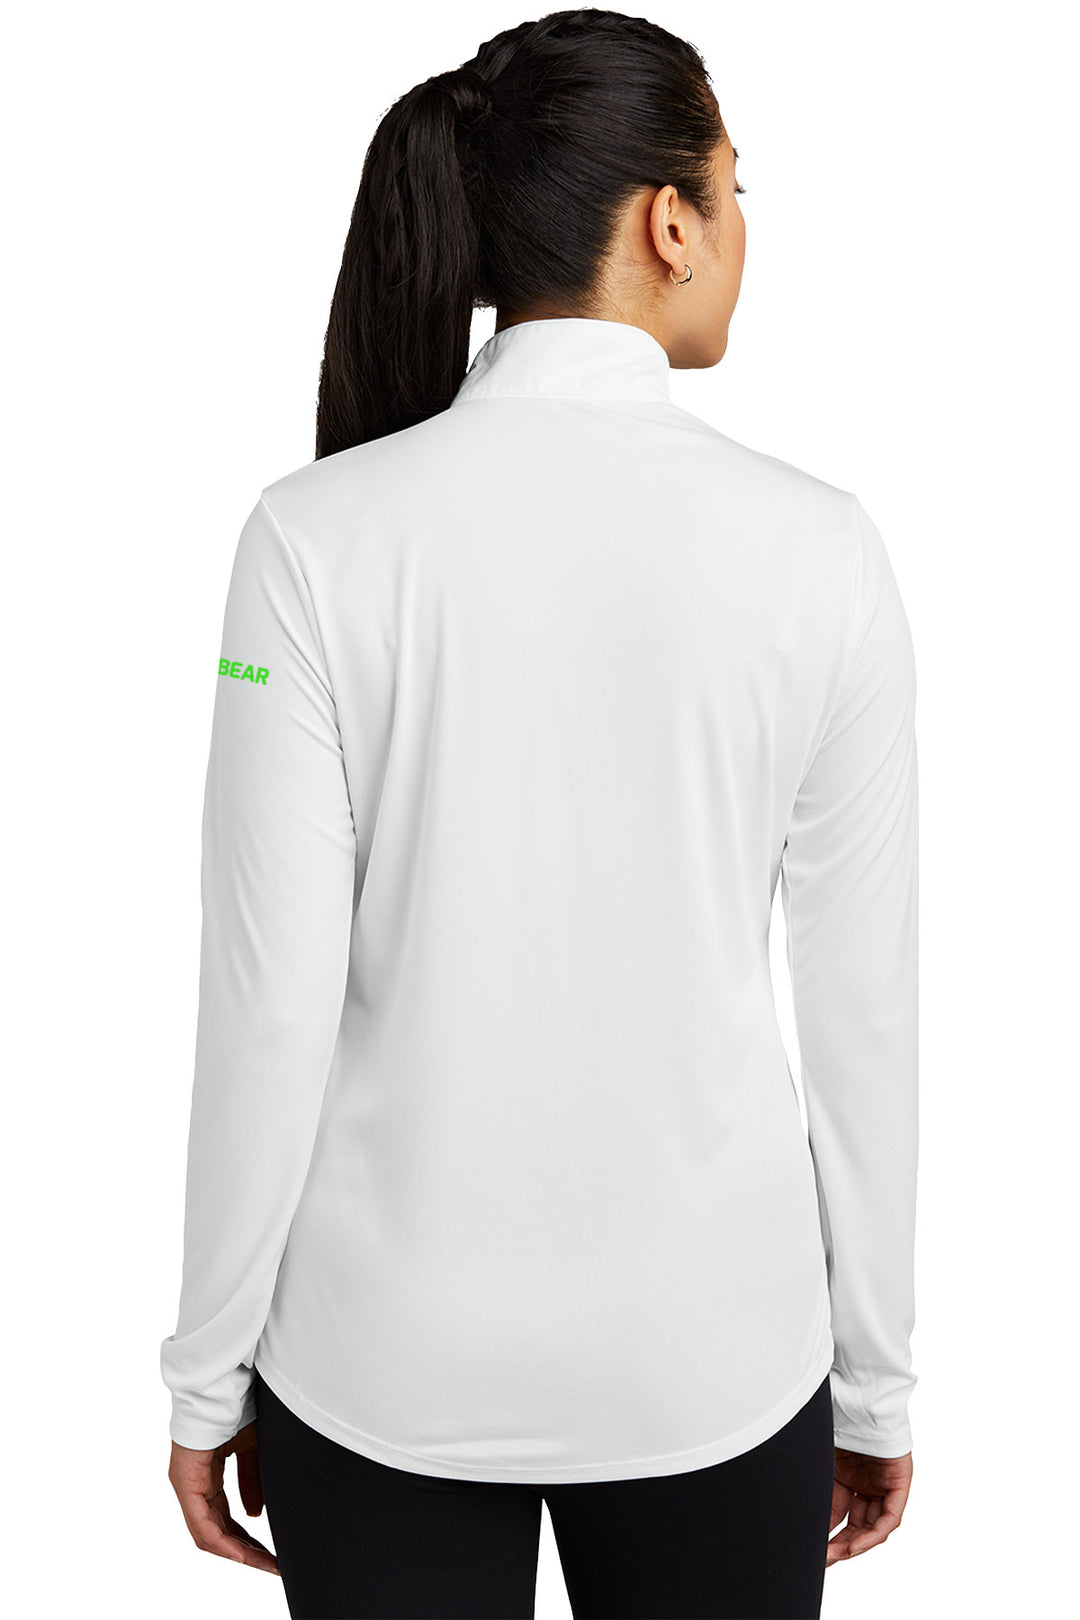 Ladies PosiCharge Competitor 1/4-Zip Pullover